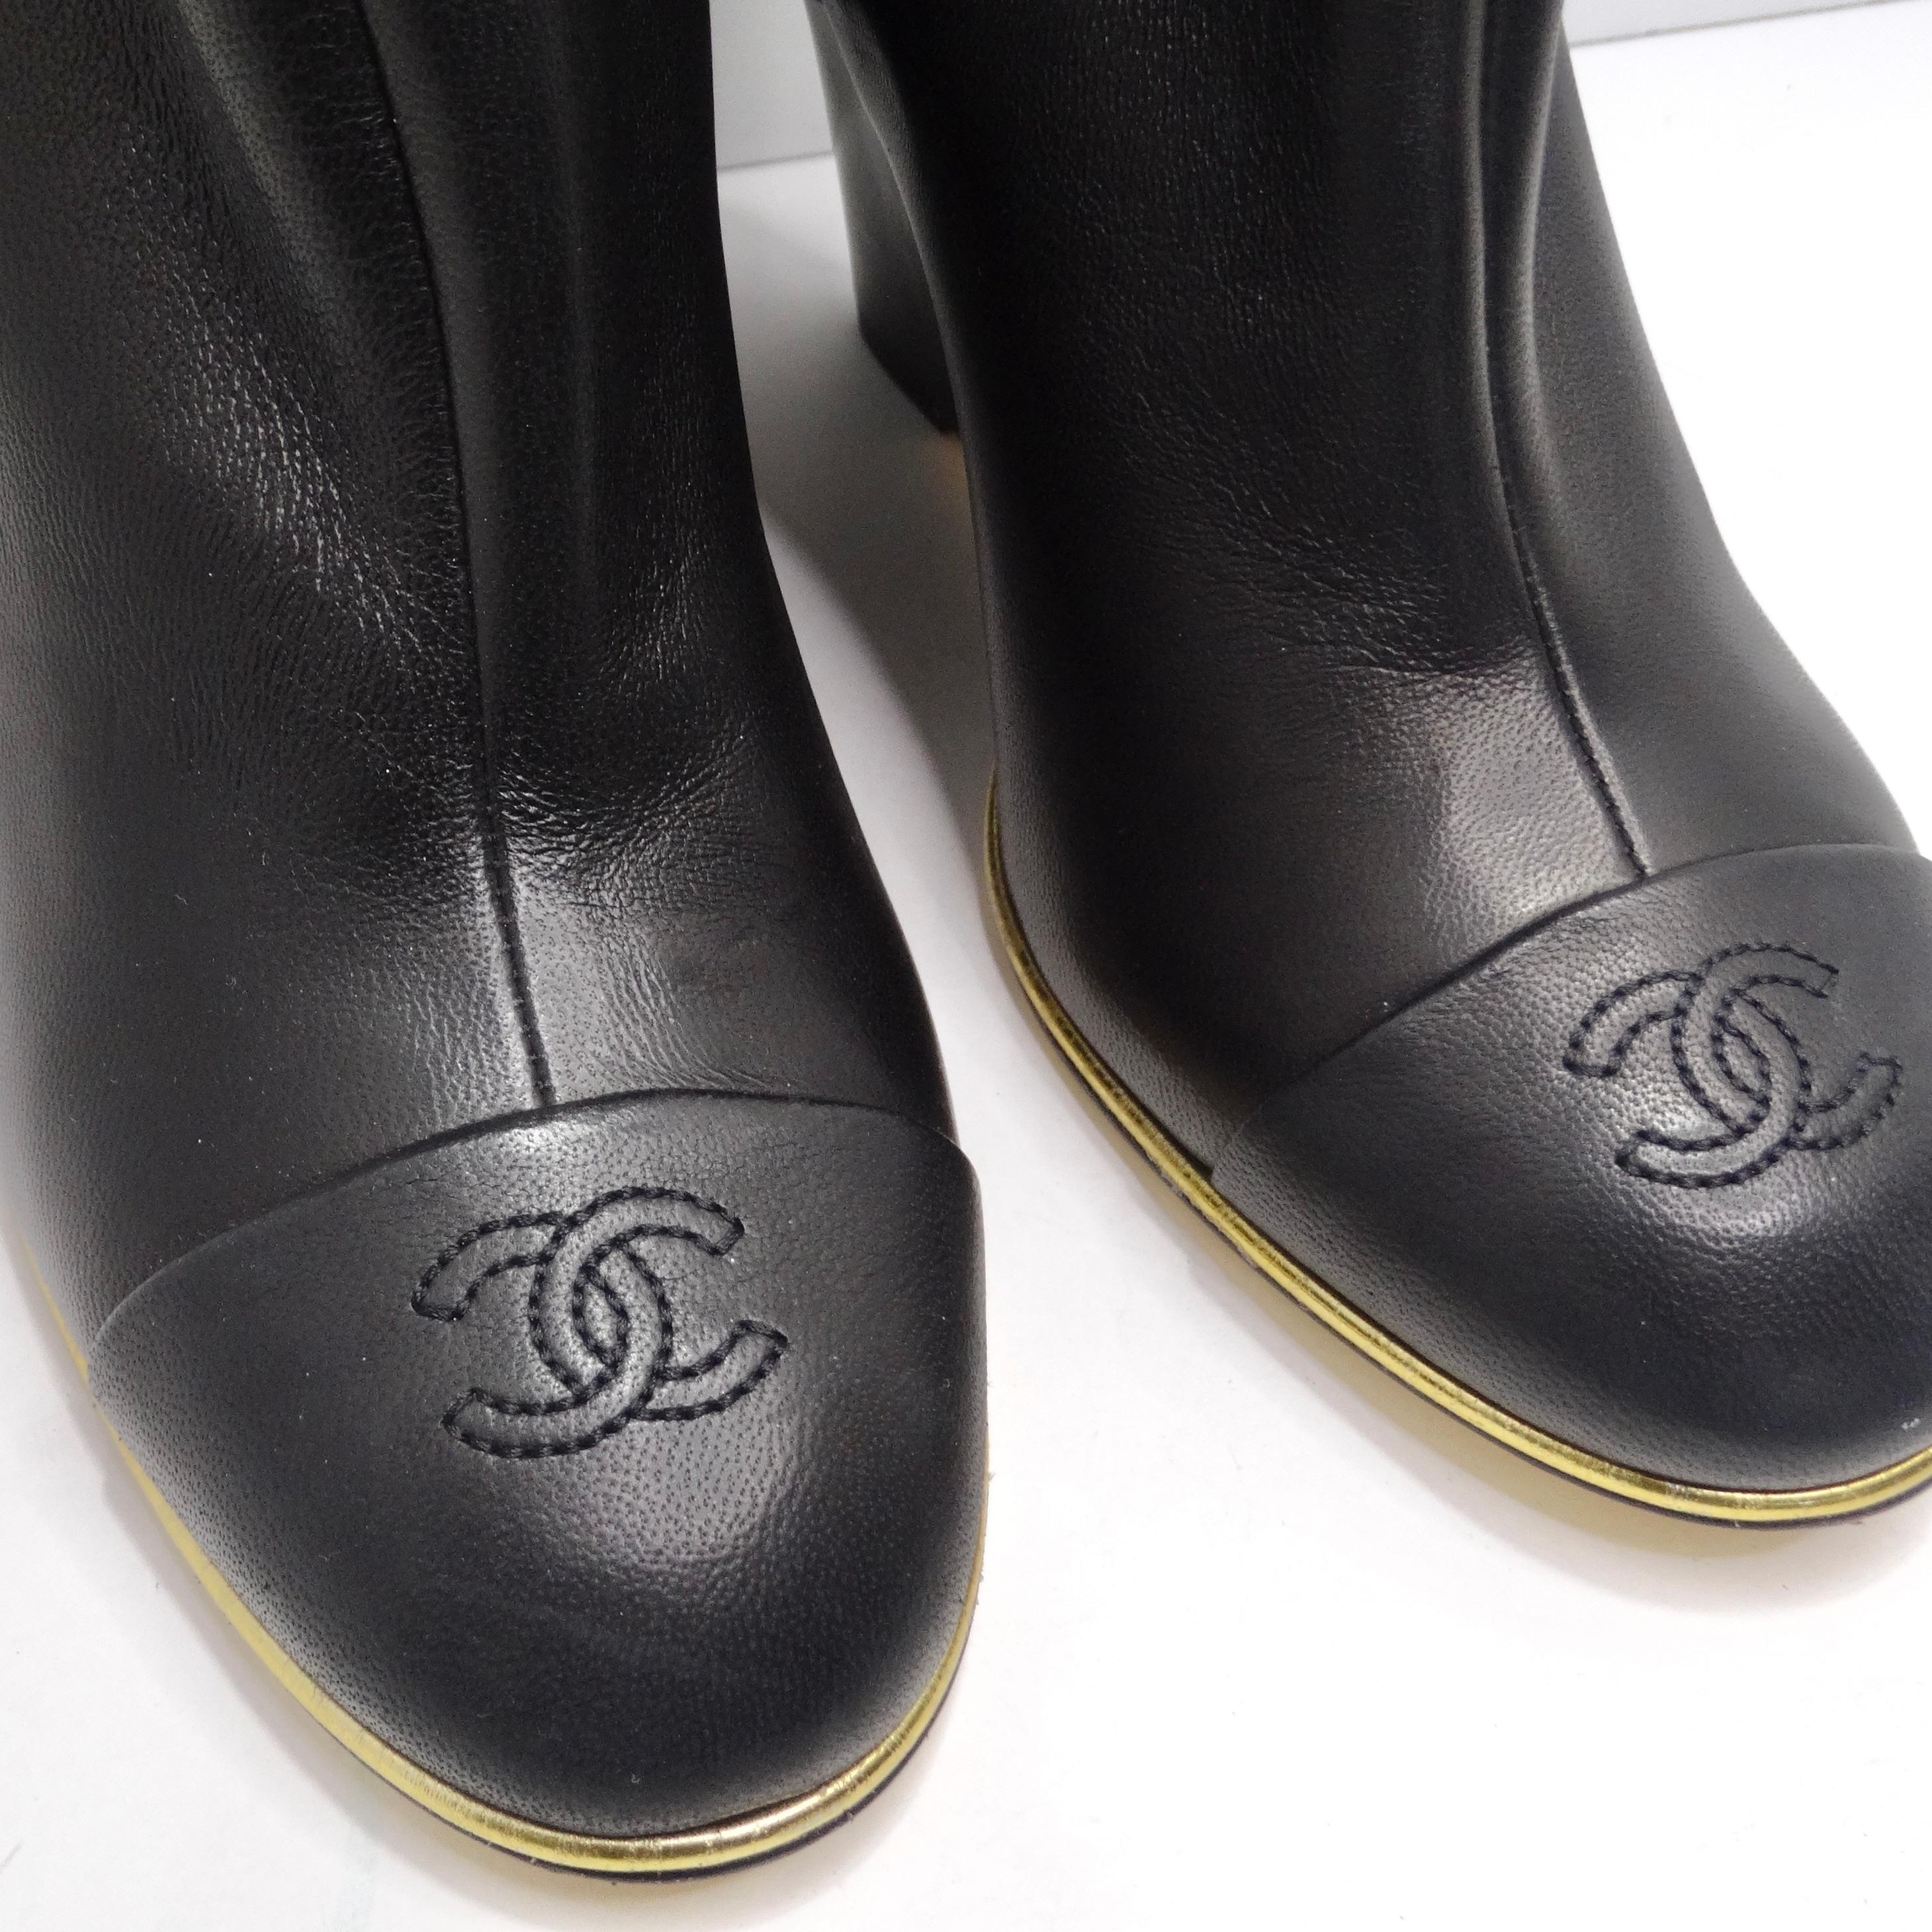 Introducing the Chanel Black Leather CC Over The Knee Wedge Boots – the epitome of luxury and edgy style. These boots are more than just footwear; they are a bold fashion statement that exudes sophistication. The signature Chanel interlocking 'C'